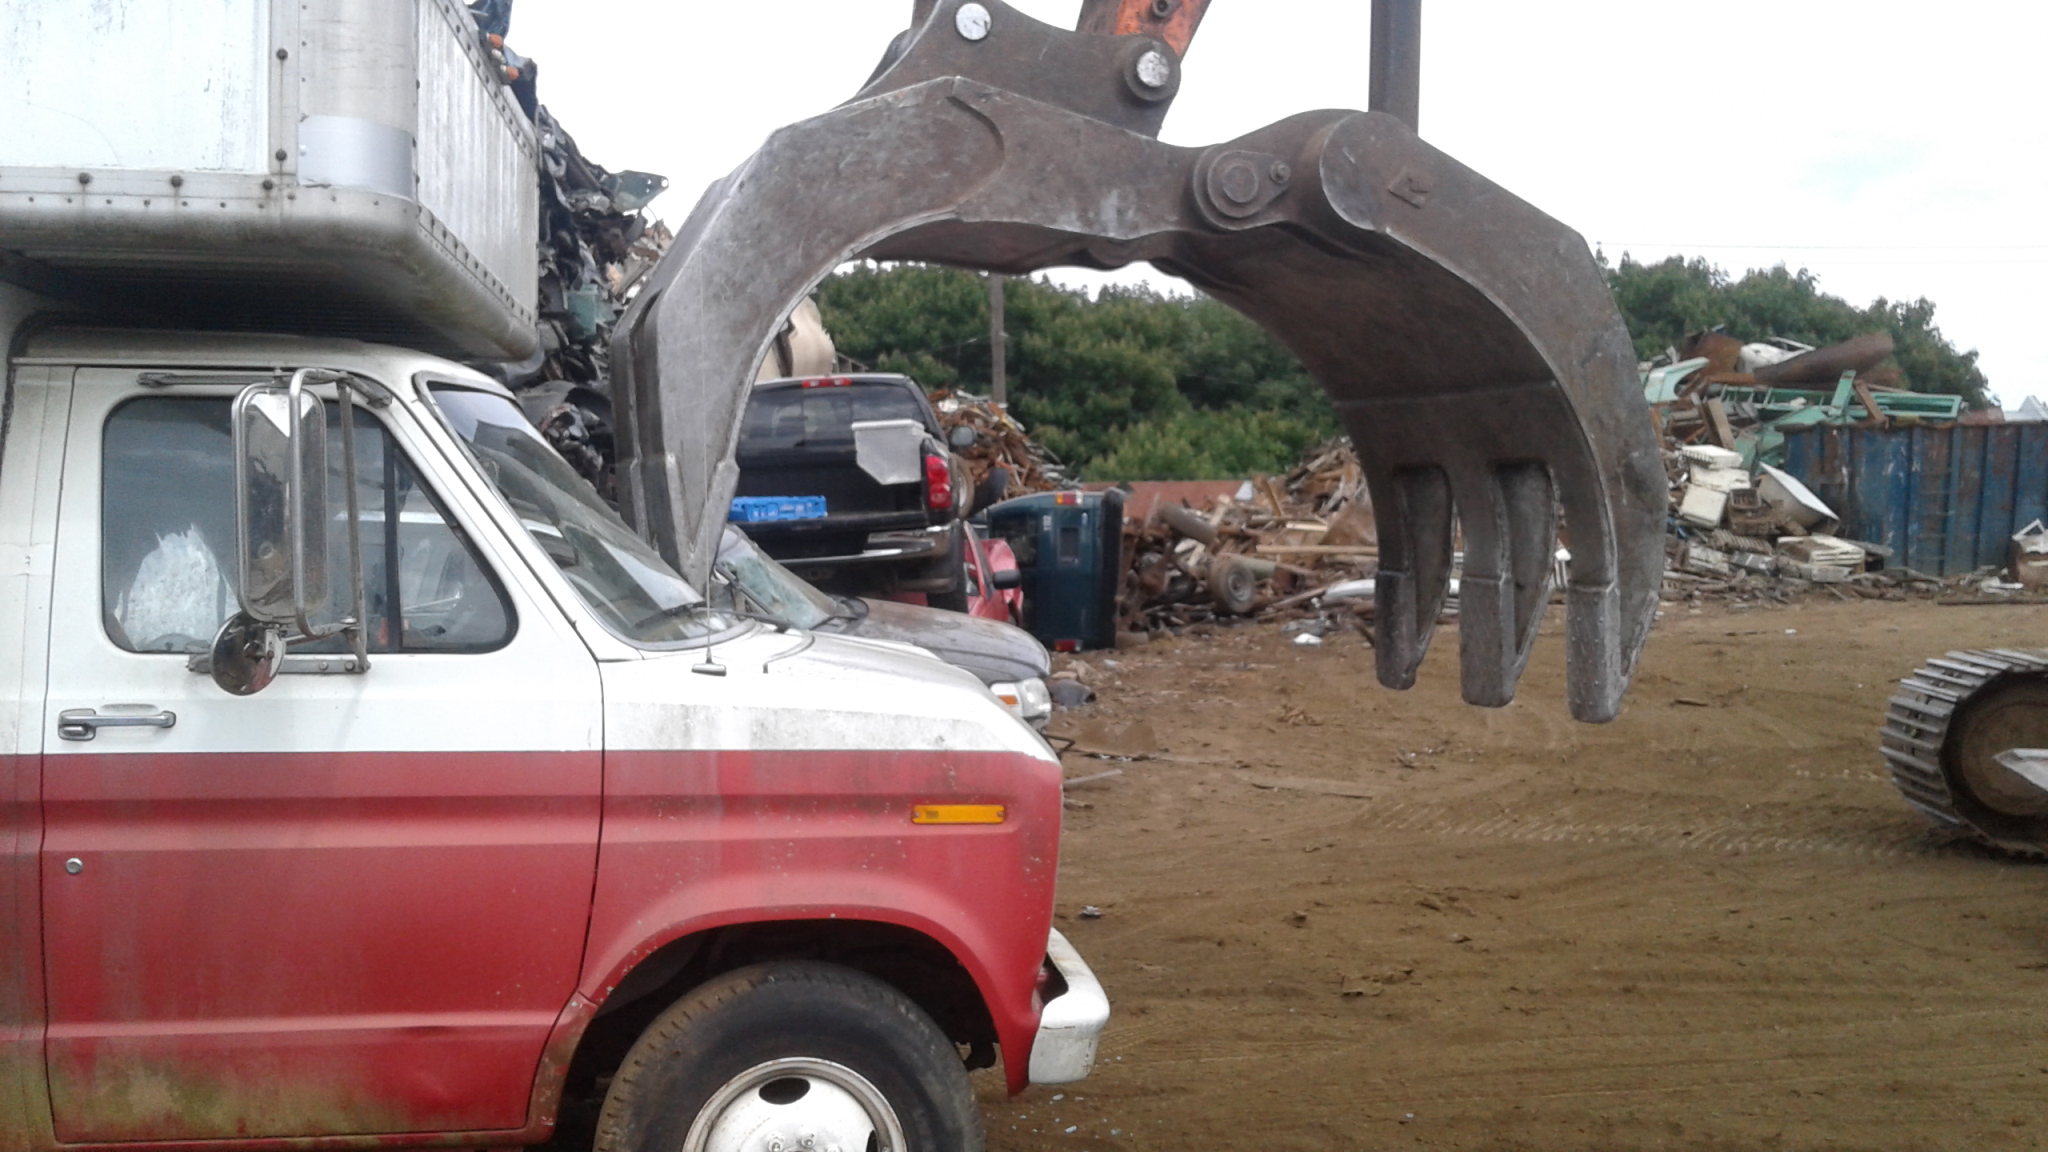 All Tow Recovery Towing & Auto Salvage - Cash For Junk Cars